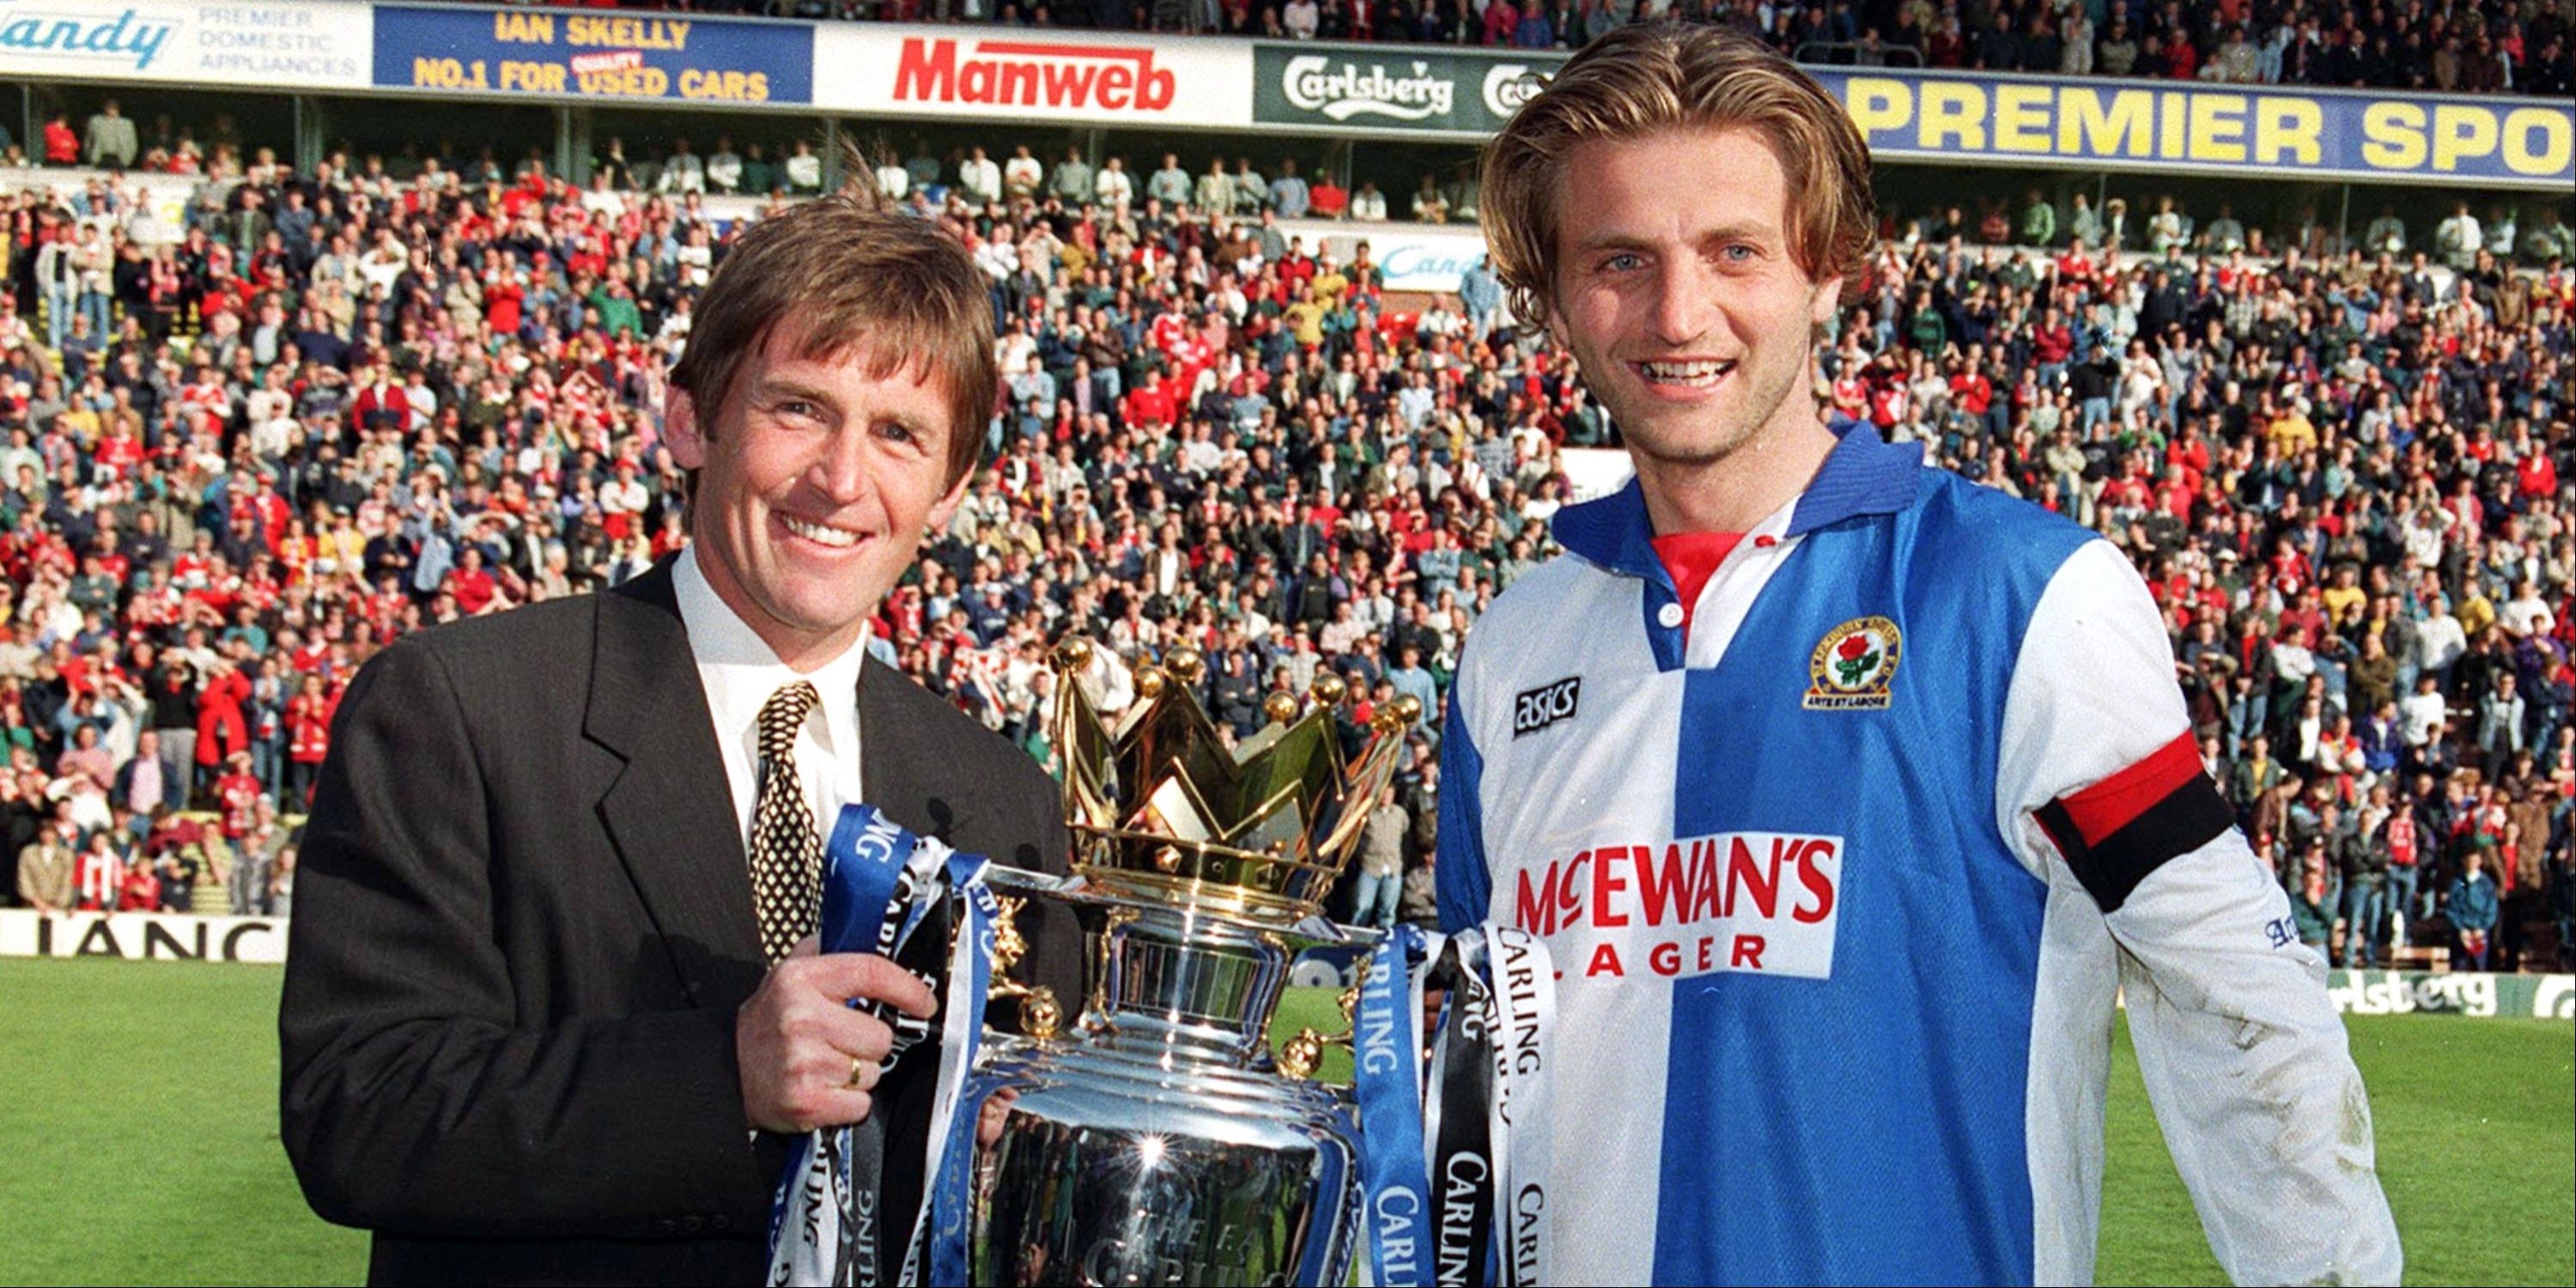 Kenny Dalglish and Tim Sherwood with the Premier League trophy